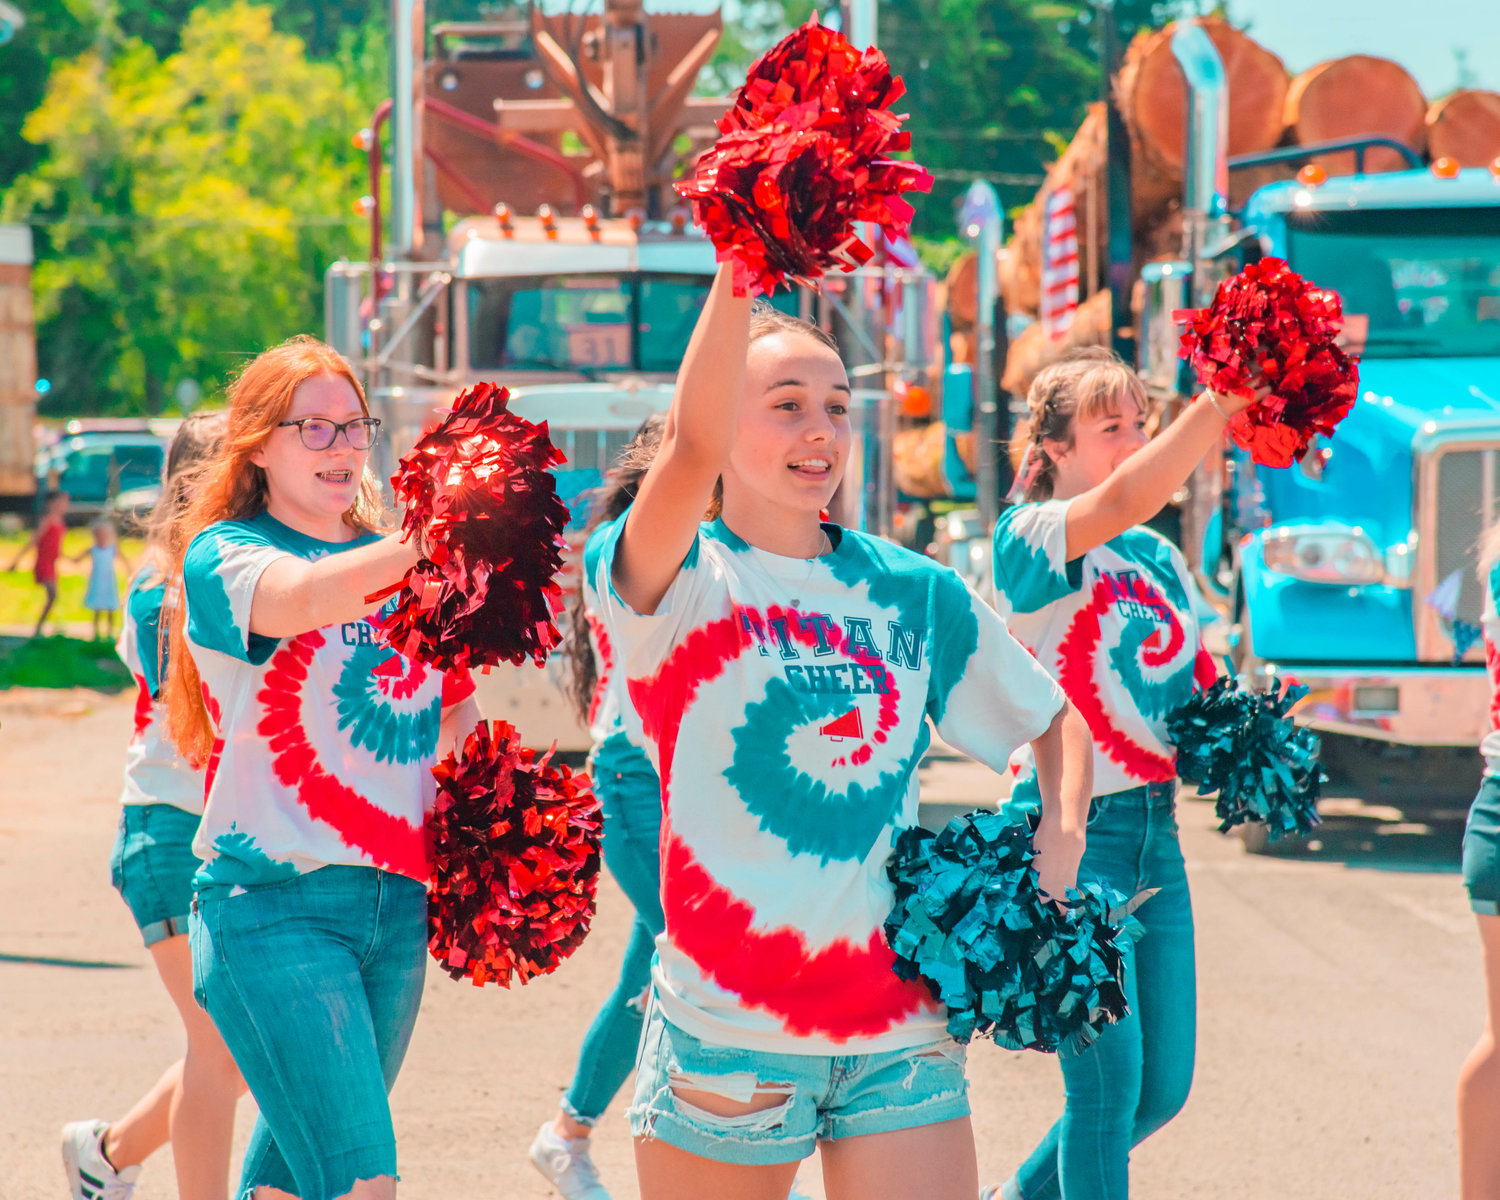 Members of the Titan cheer squad raise their poms during the Pe Ell Fourth of July parade Sunday afternoon.